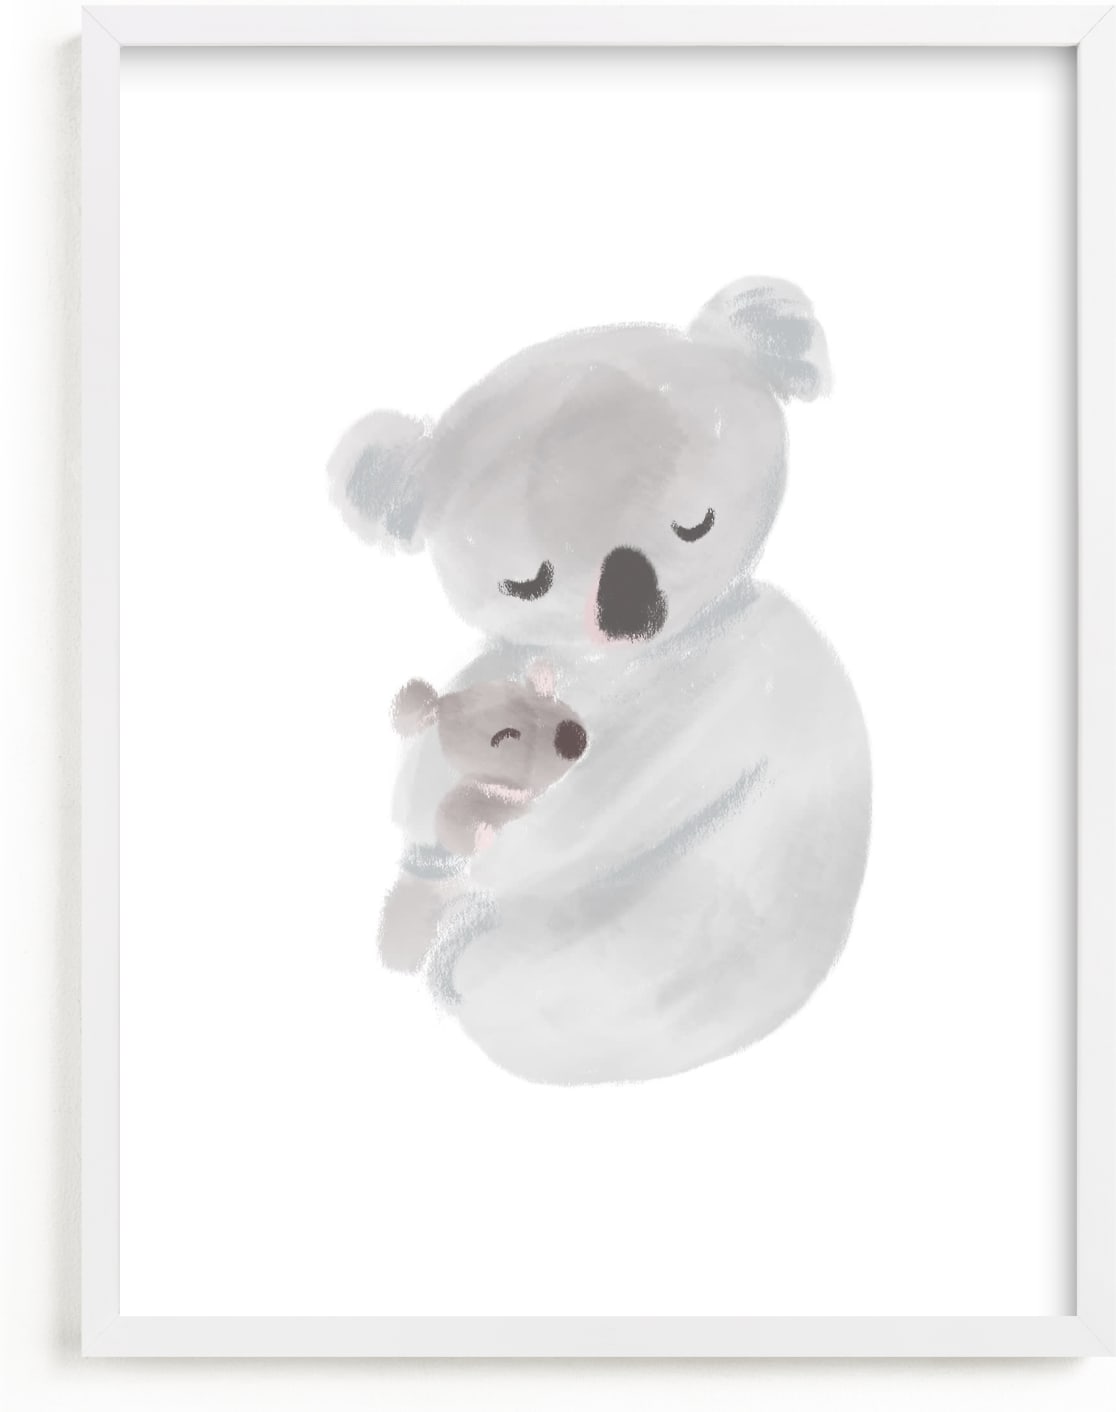 This is a grey nursery wall art by chocomocacino called suzette.